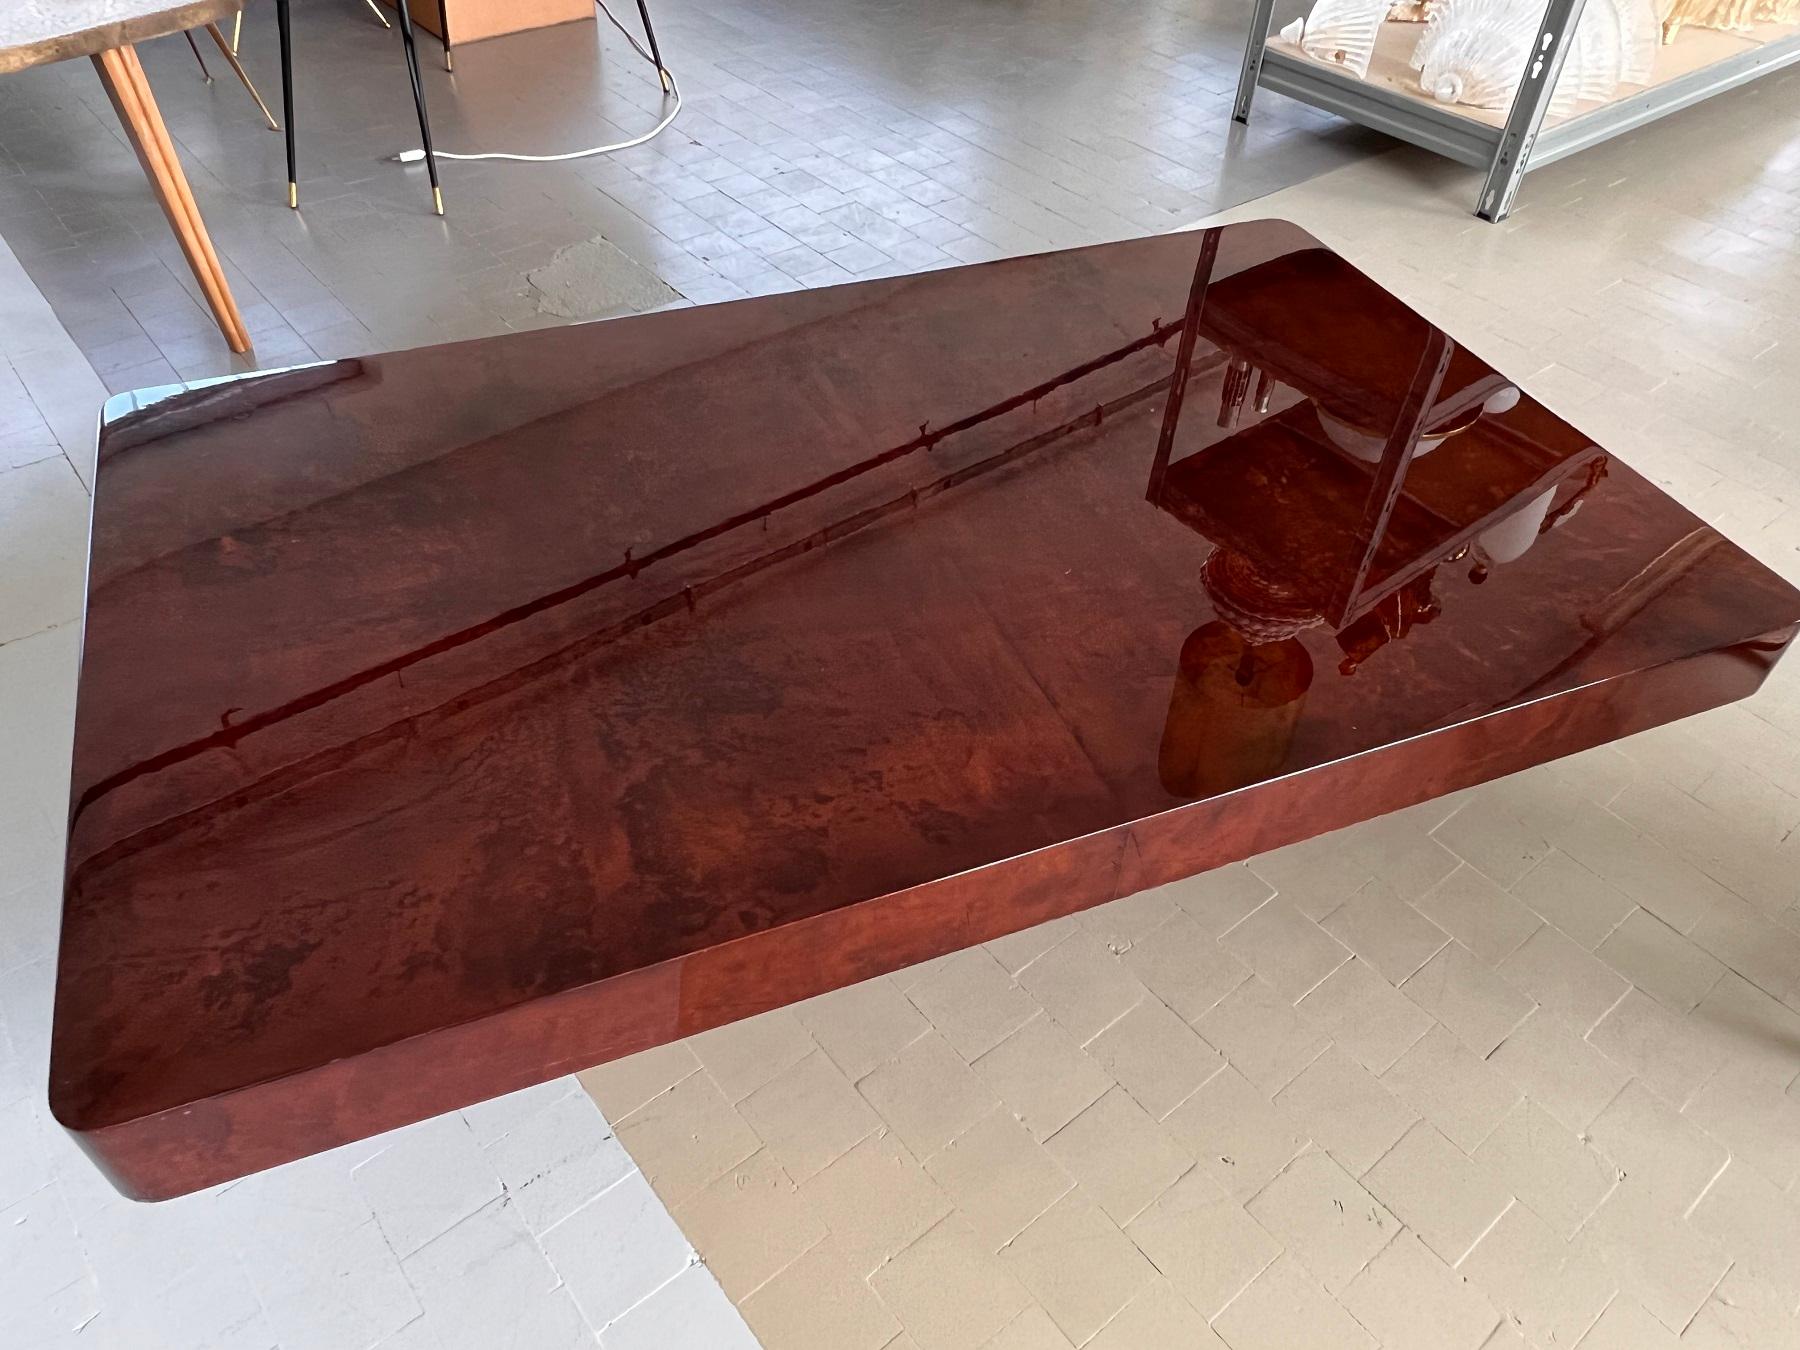 Exceptional, magnificent coffee table designed by Aldo Tura during the 1970s.
The table has been covered in red-brown-mahogany colored parchment paper and finished with a high gloss strong lacquer.  Beautiful statement piece, guaranteed to ignite